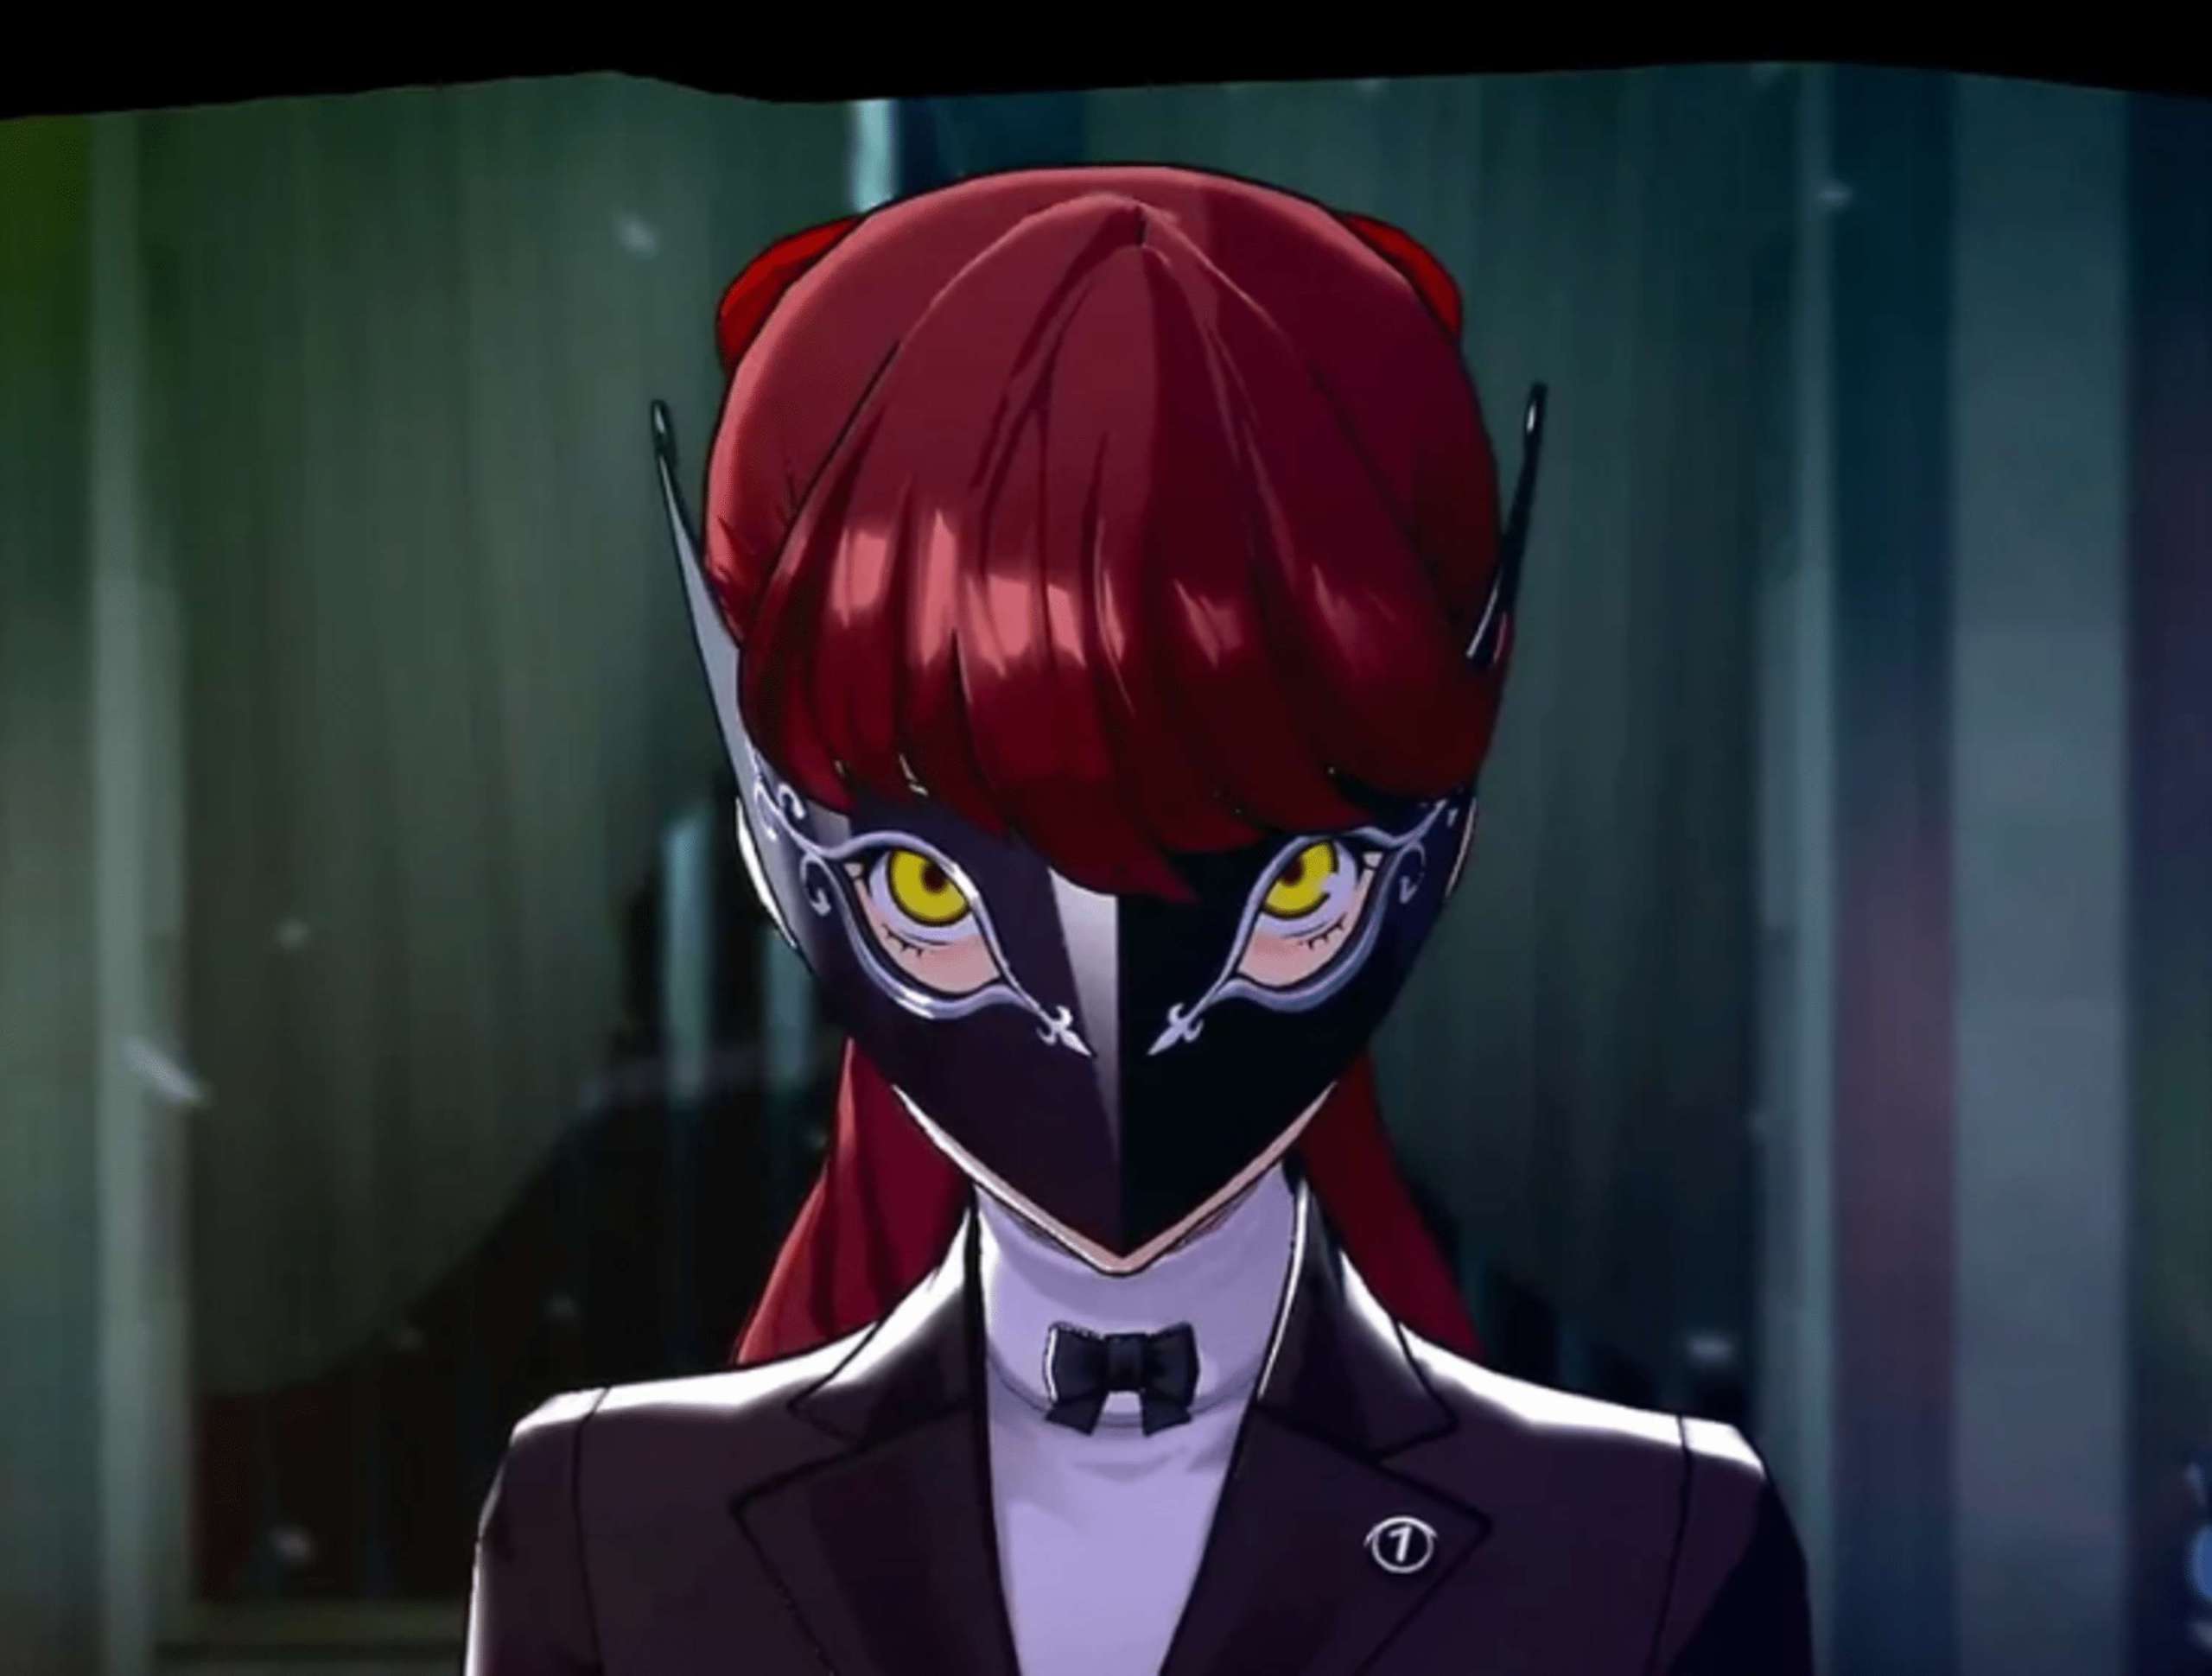 In Persona 5 Royal, The Default Name Has Been Changed To Ren Amamiya